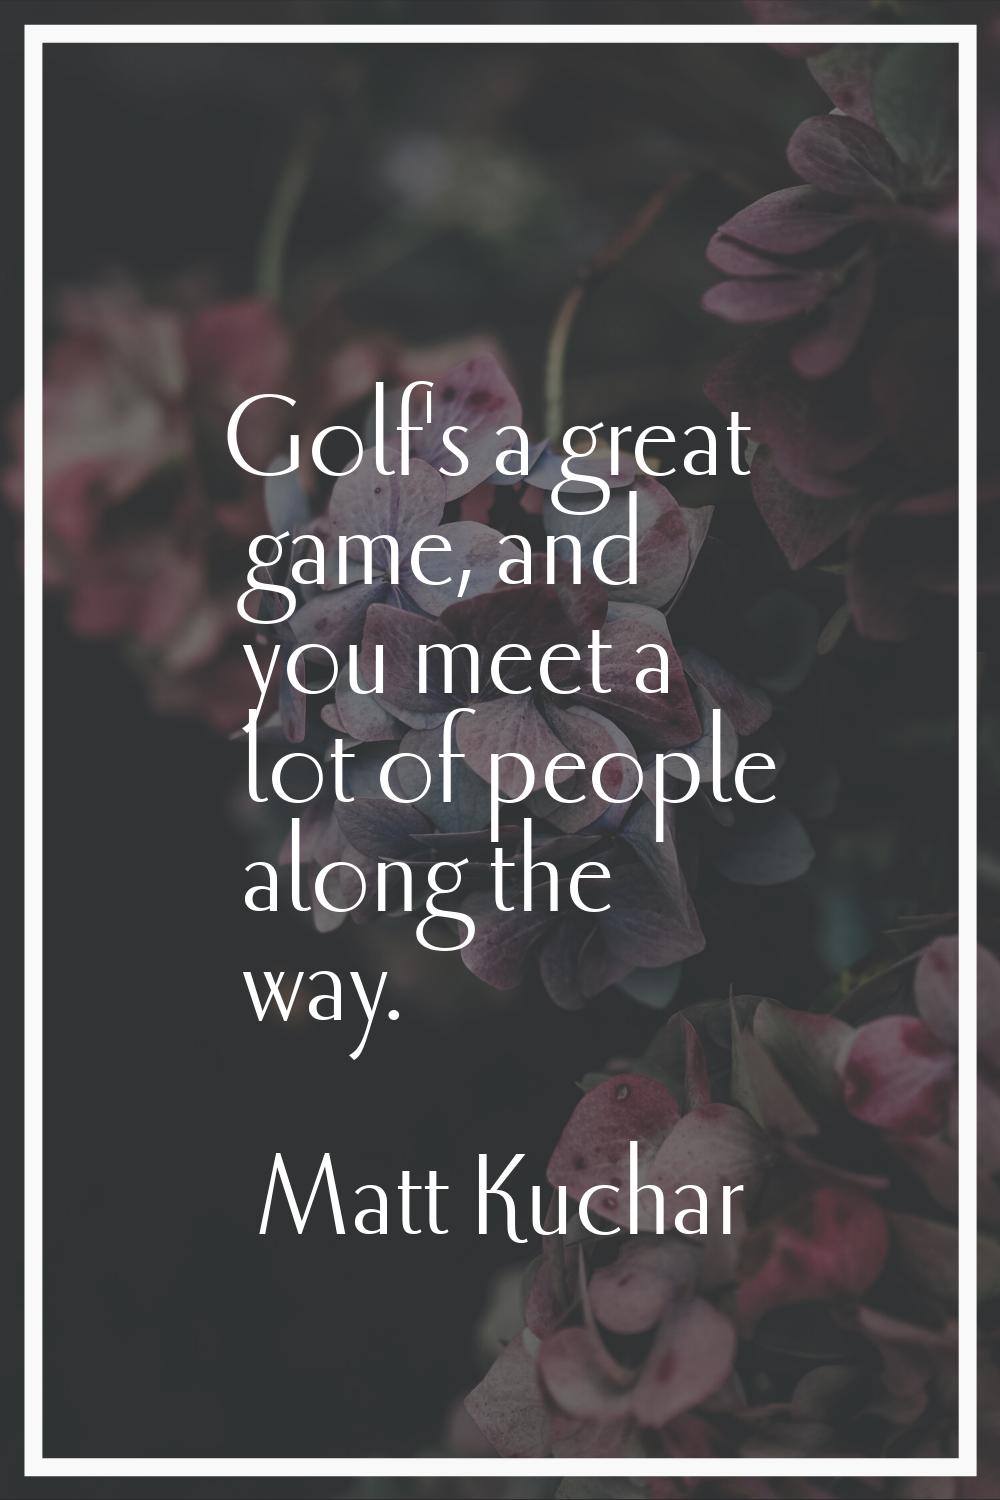 Golf's a great game, and you meet a lot of people along the way.